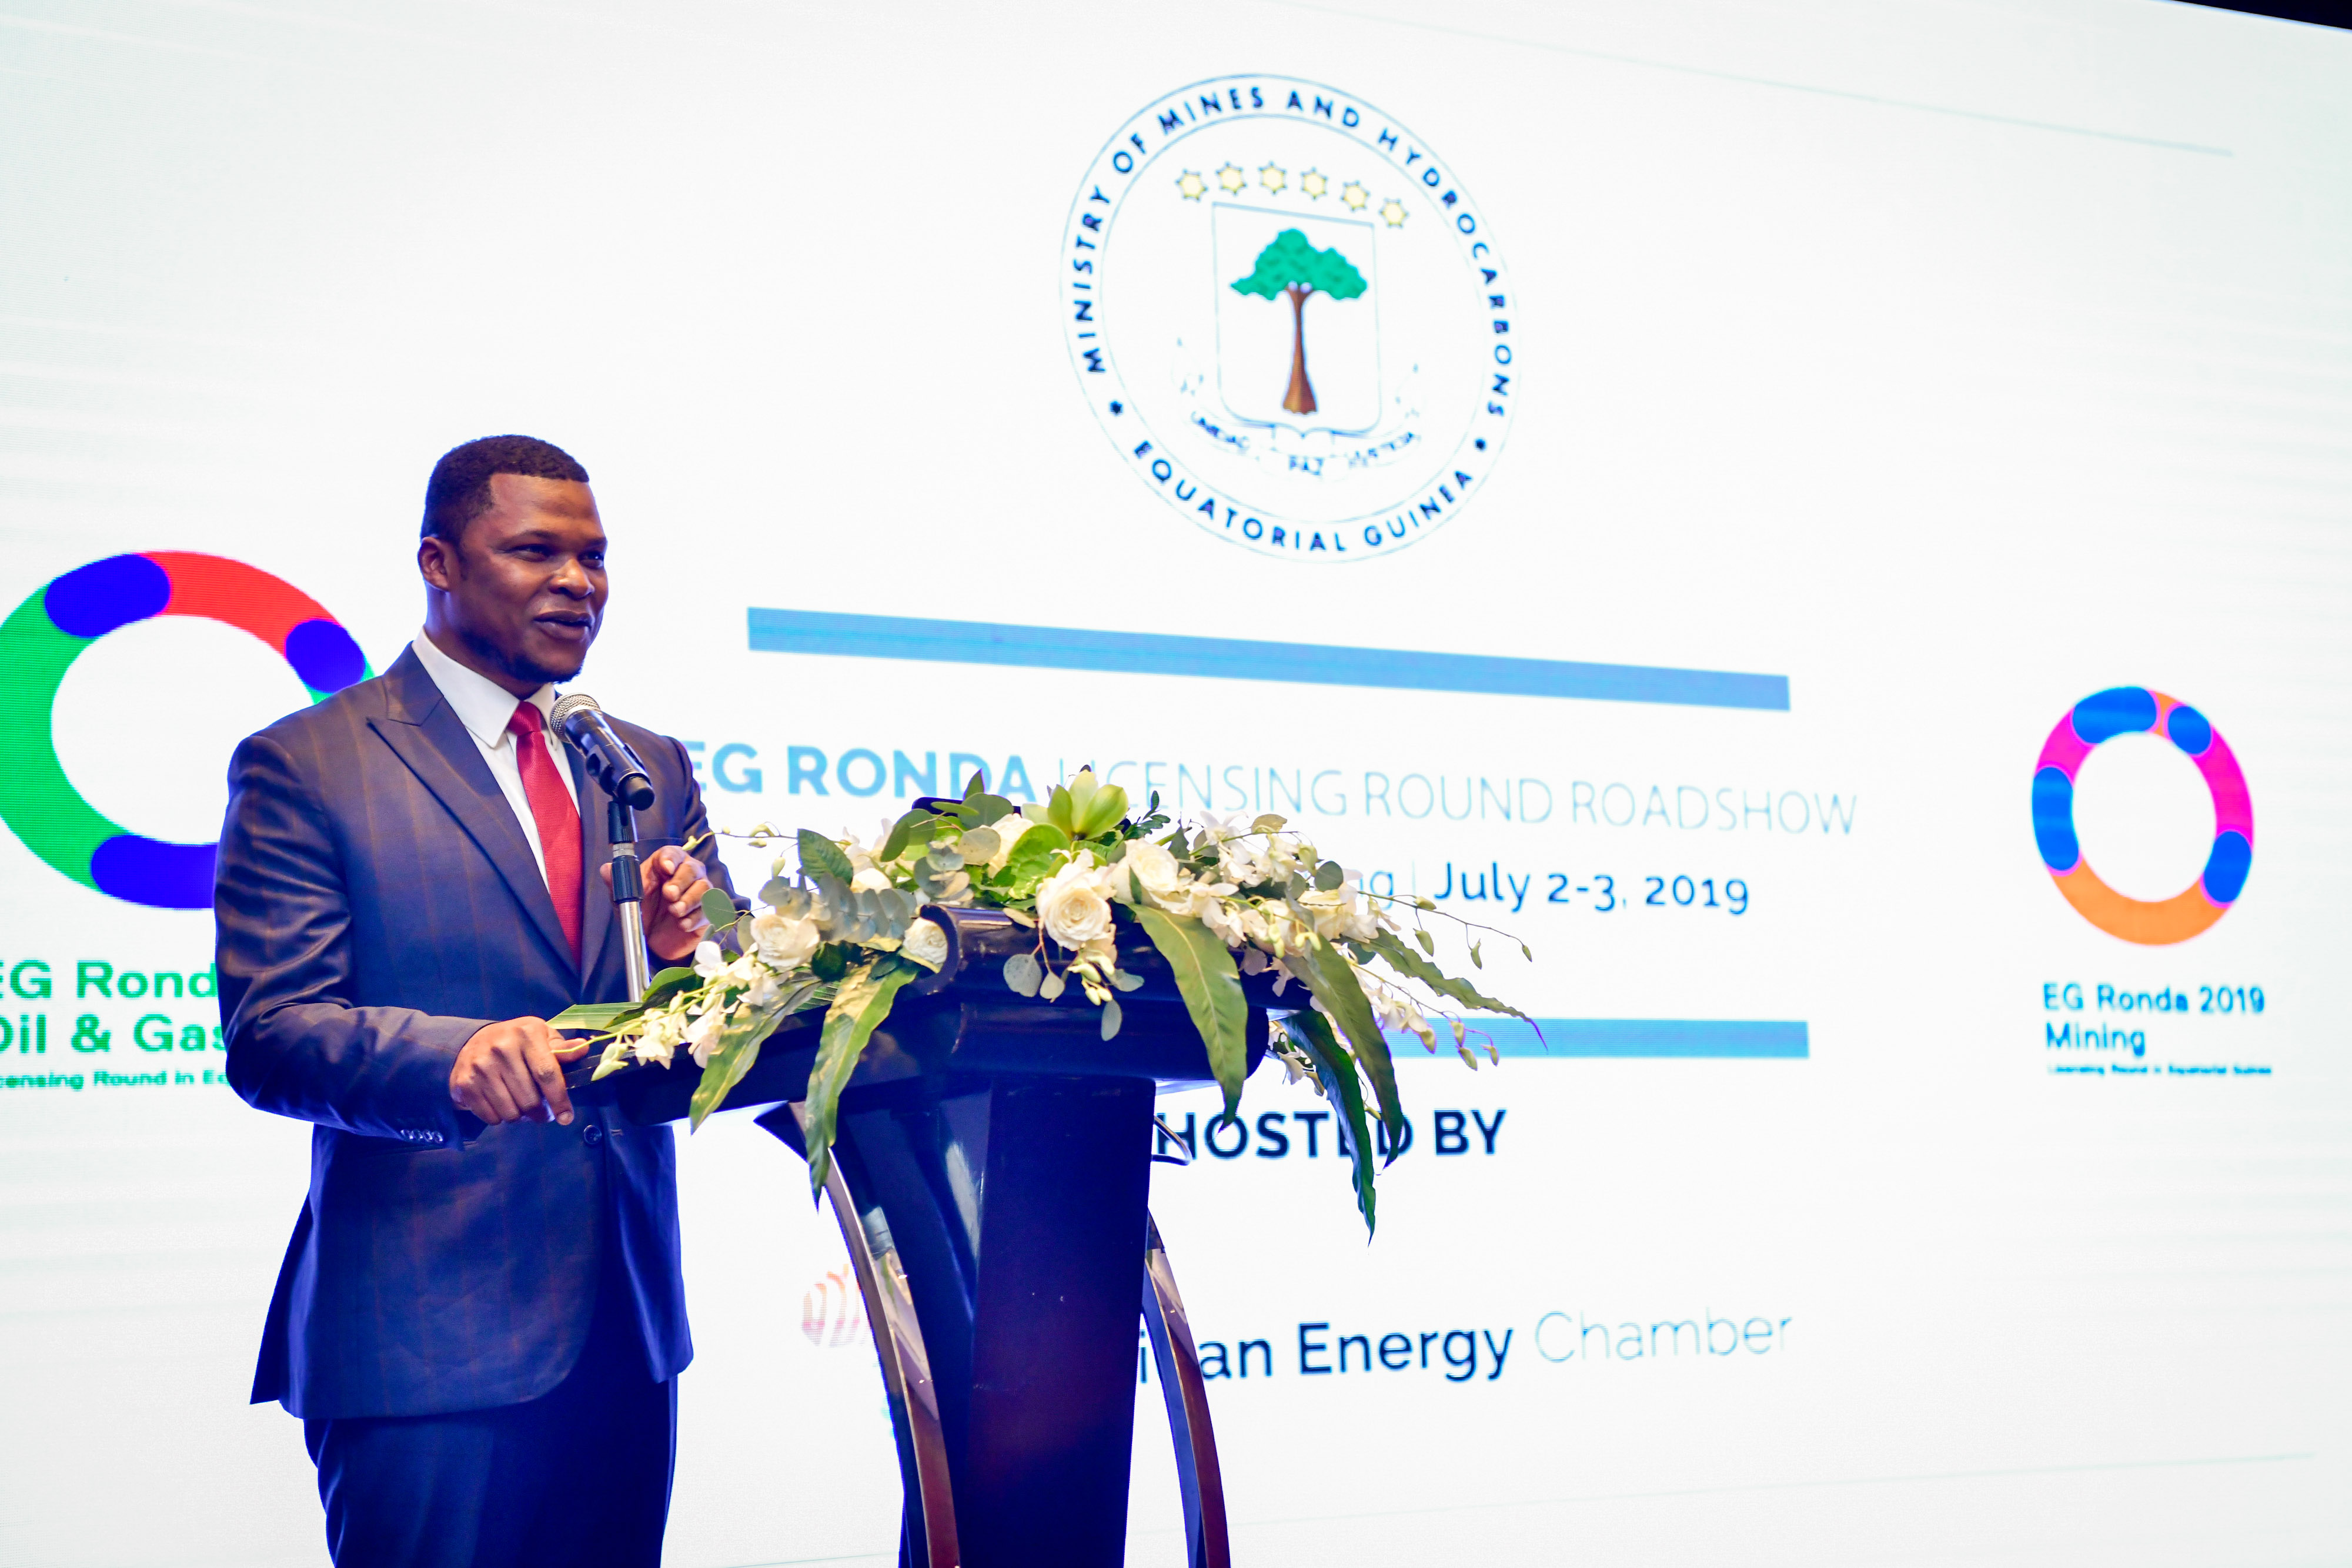 African Energy Chamber’s Investment Push in China is Met with Tremendous Success